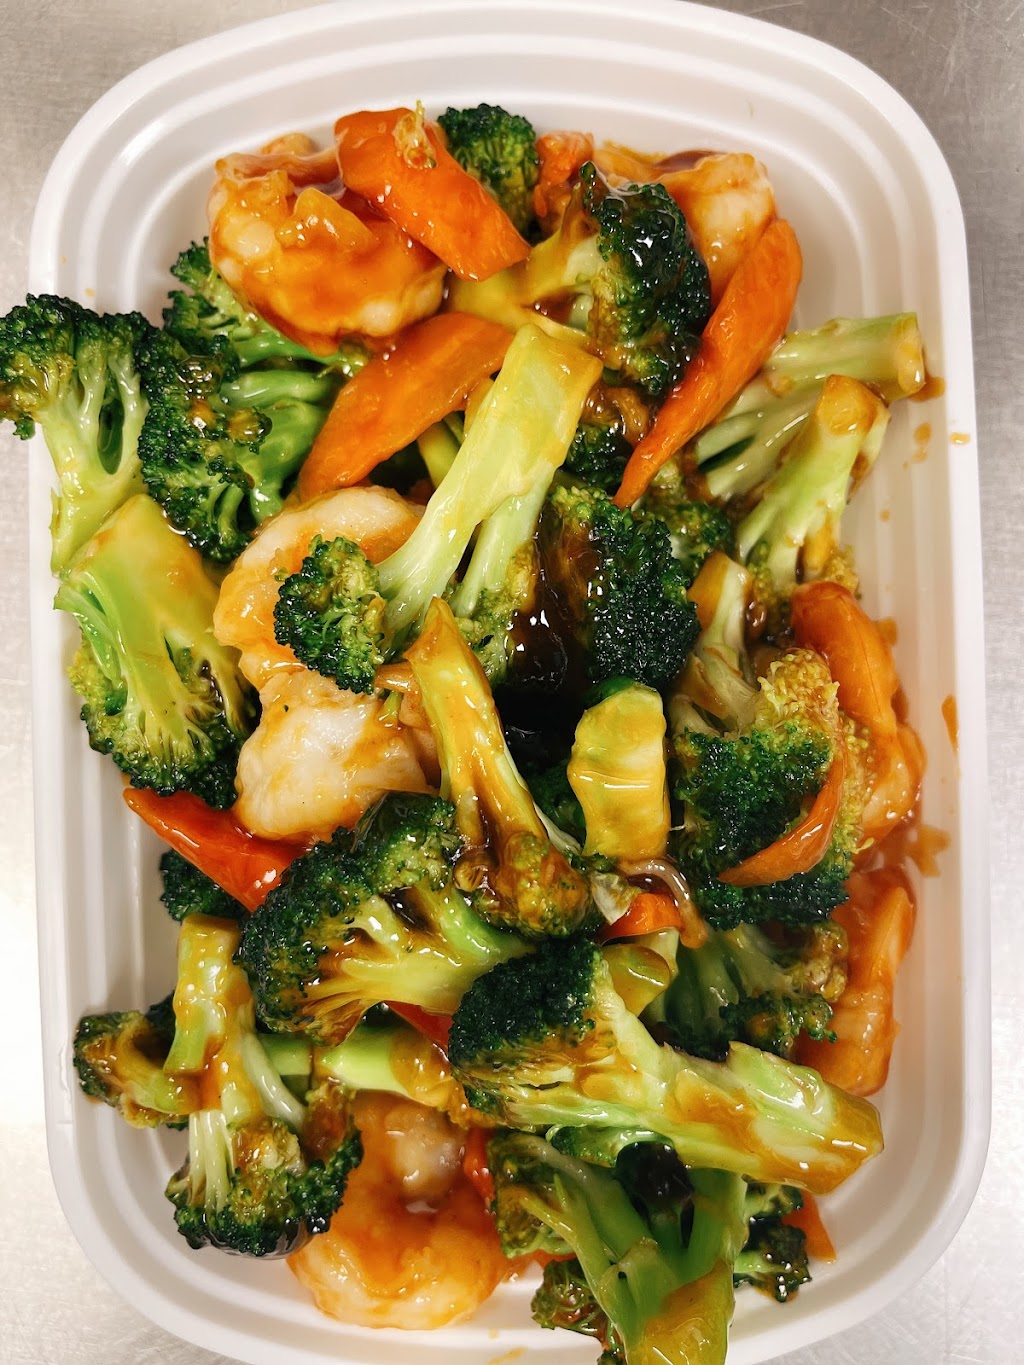 China Dragon | 4017 Annistown Rd ste G, Snellville, GA 30039, USA | Phone: (770) 696-4091